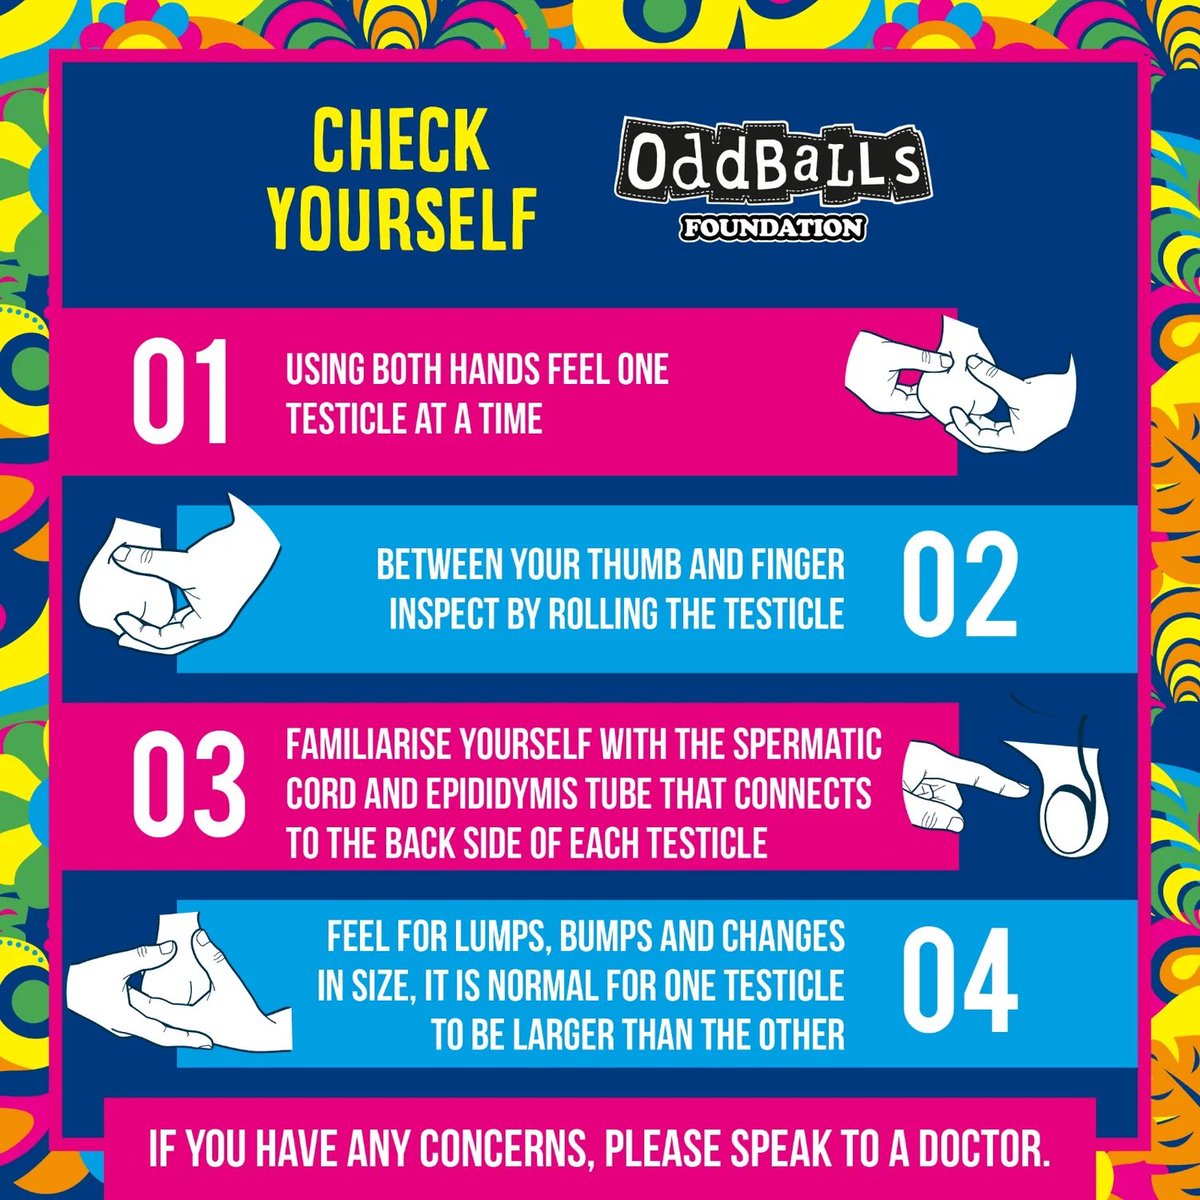 Please share! It’s #TesticularCancerAwareness month. Please check your balls! 🙌⚽️⚽️ 🗓️ Check on a monthly basis. 🫴 Familiarise yourself with what’s normal for YOU! 🛁 Check after a warm bath or shower. 💬 Speak to a doctor if you have ANY concerns! @OddBallsFDN